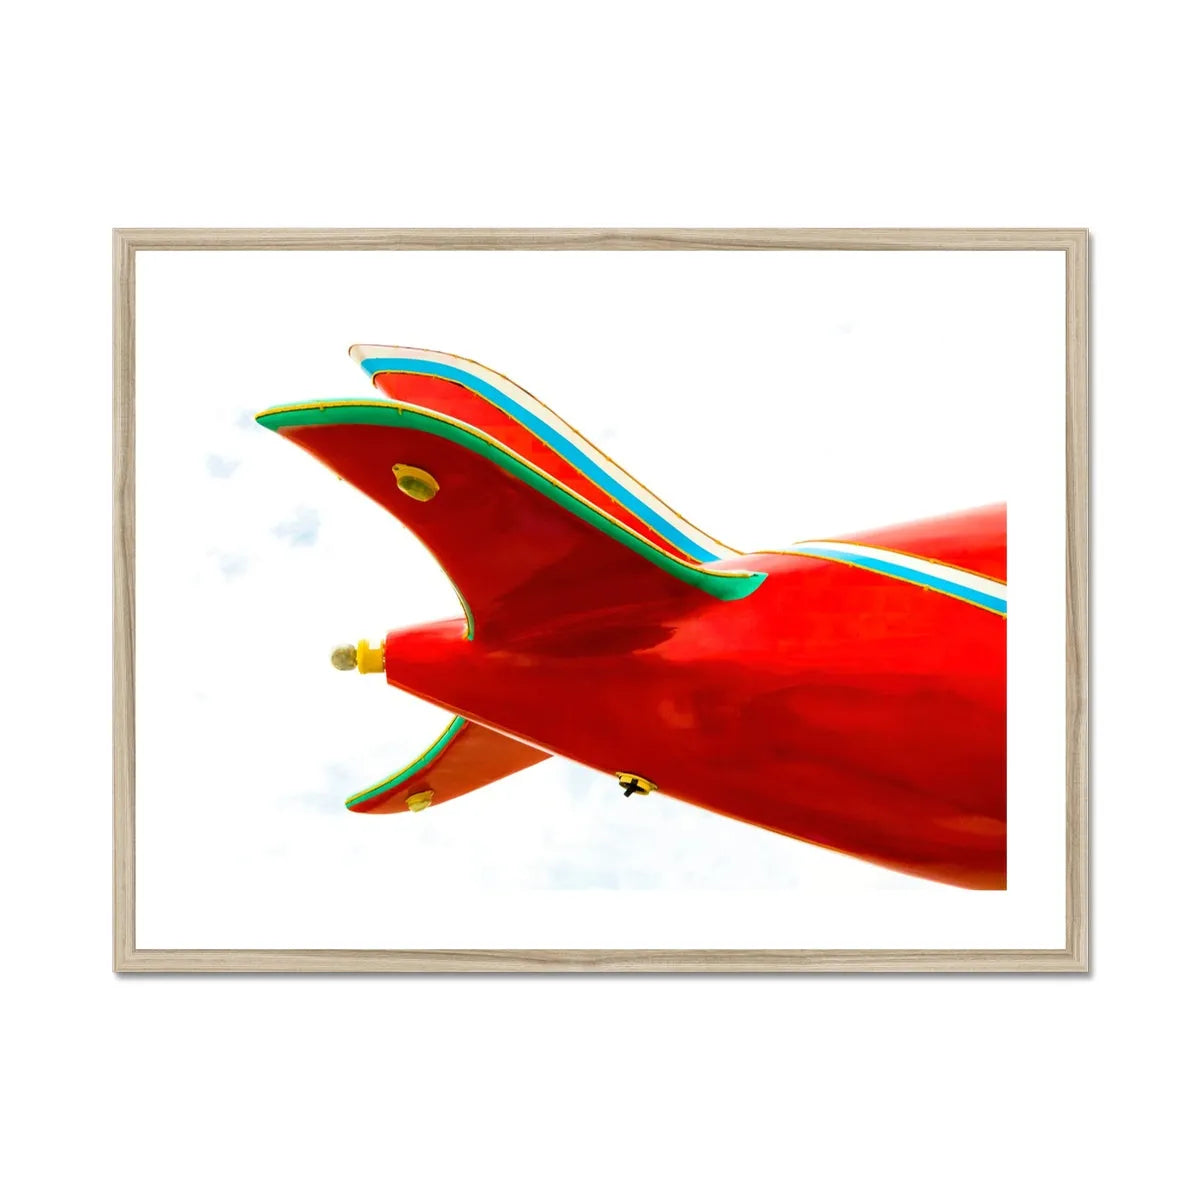 Flying High Framed & Mounted Print - 32’x24’ / Natural Frame - Posters Prints & Visual Artwork - Aesthetic Art